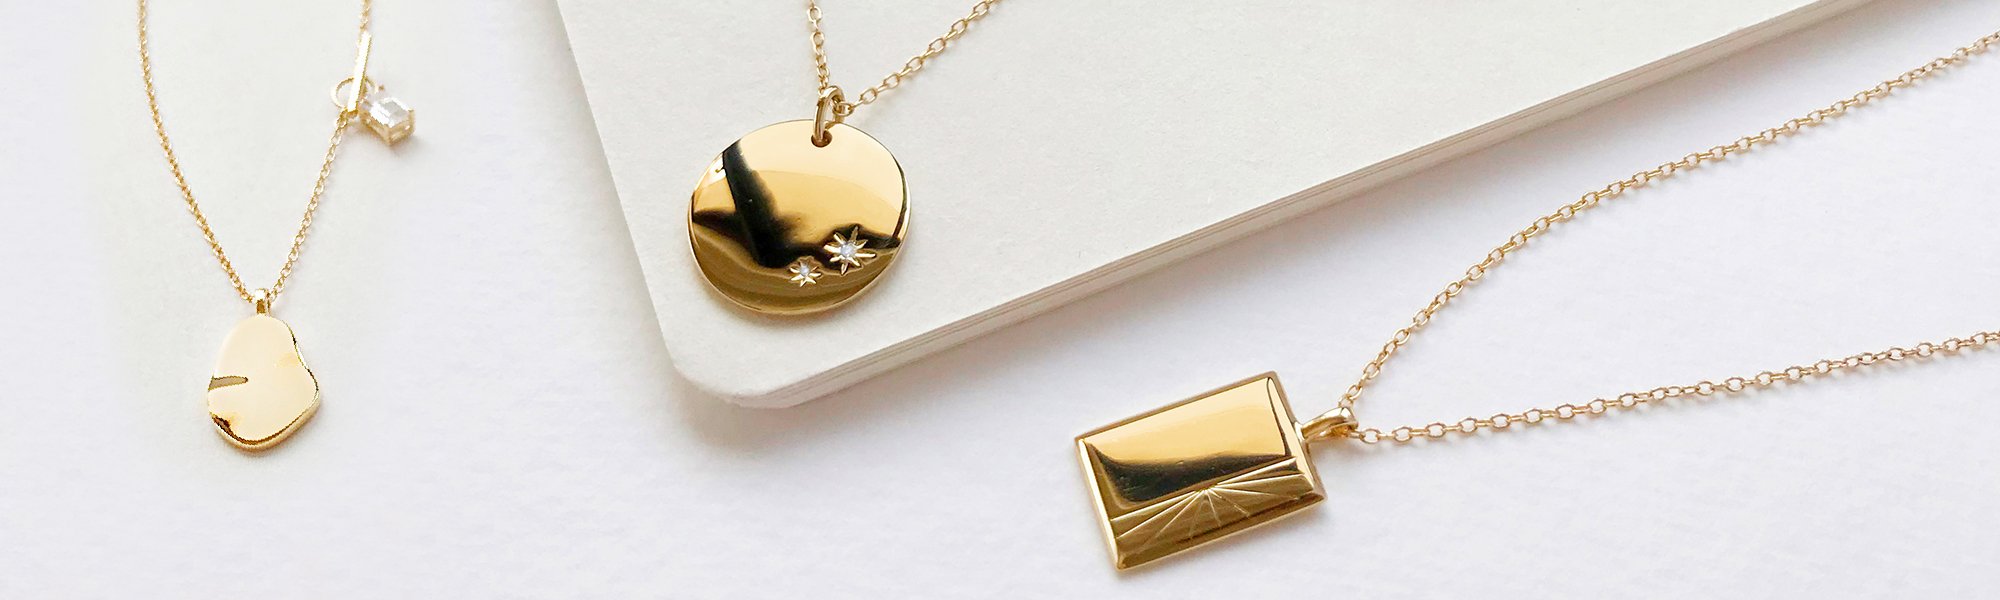 Gifts for Mom: Jewel Picks She's Sure to Love